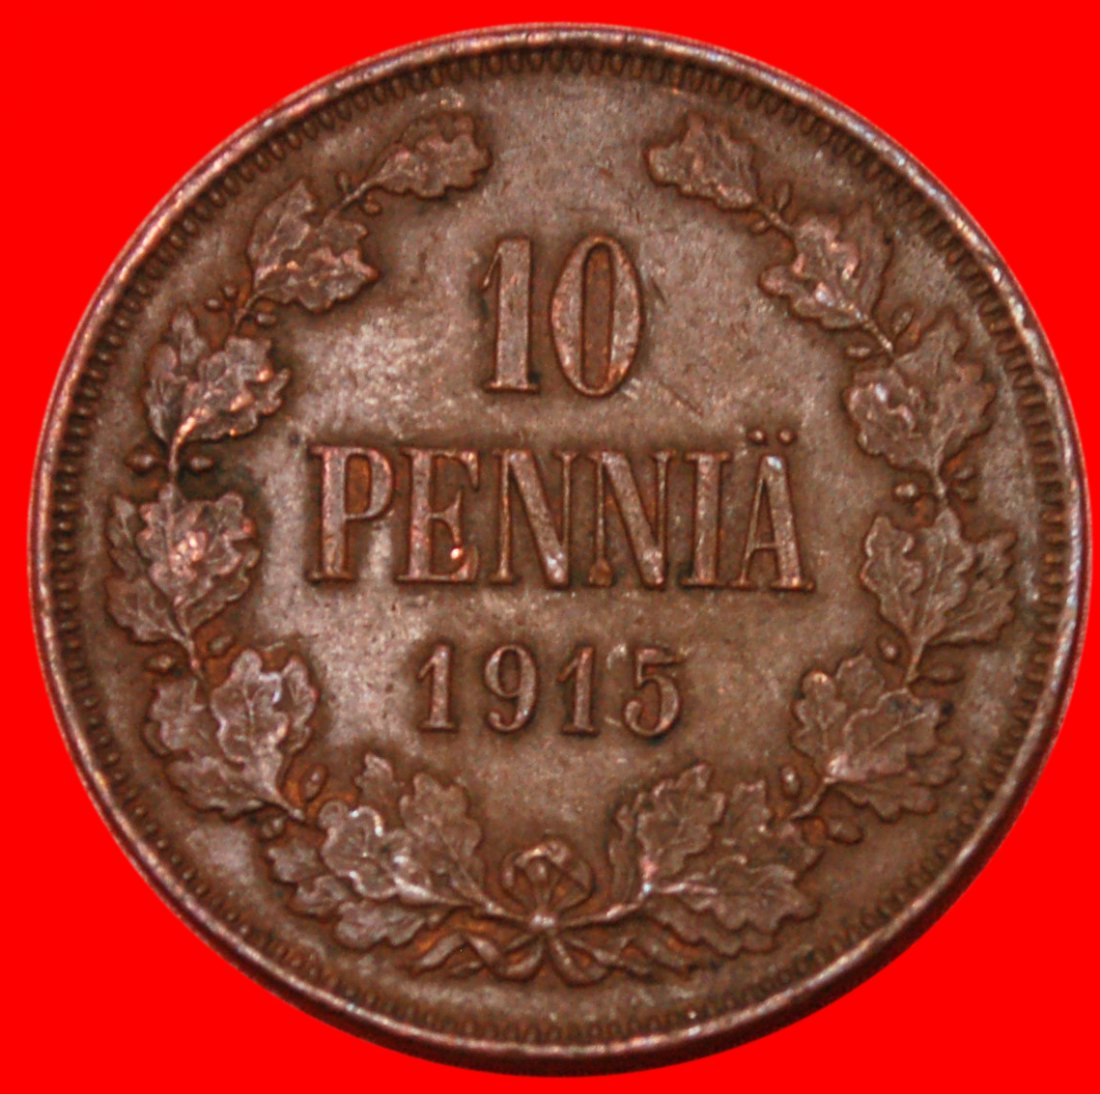  * NICOLAS II (1894-1917): FINLAND (russia, the USSR in future) ★10 PENCE 1915★LOW START ★ NO RESERVE   